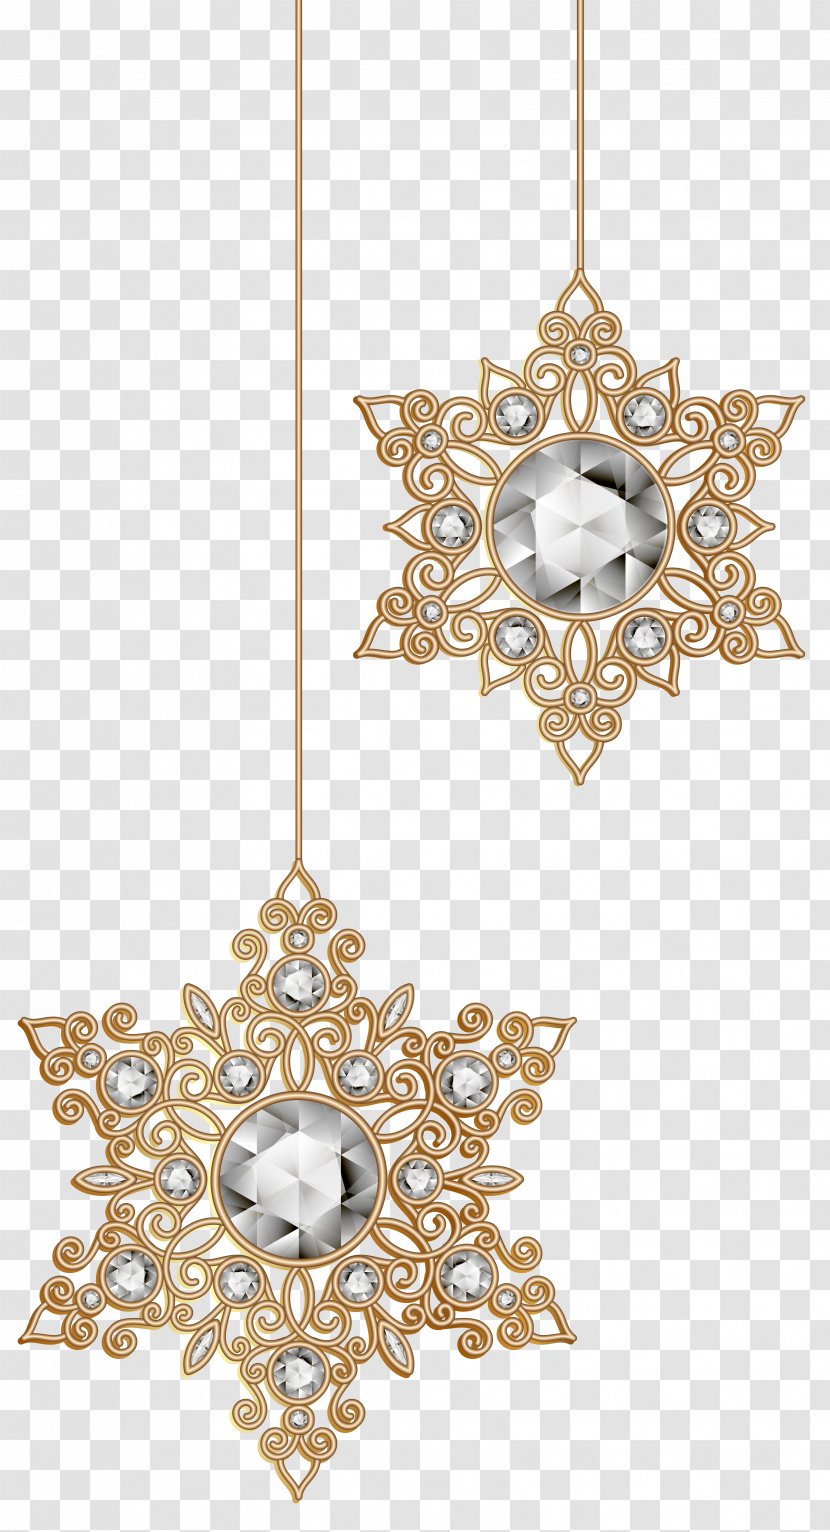 Snowflake Christmas Ornament Clip Art - Body Jewelry - Material Elements Transparent PNG